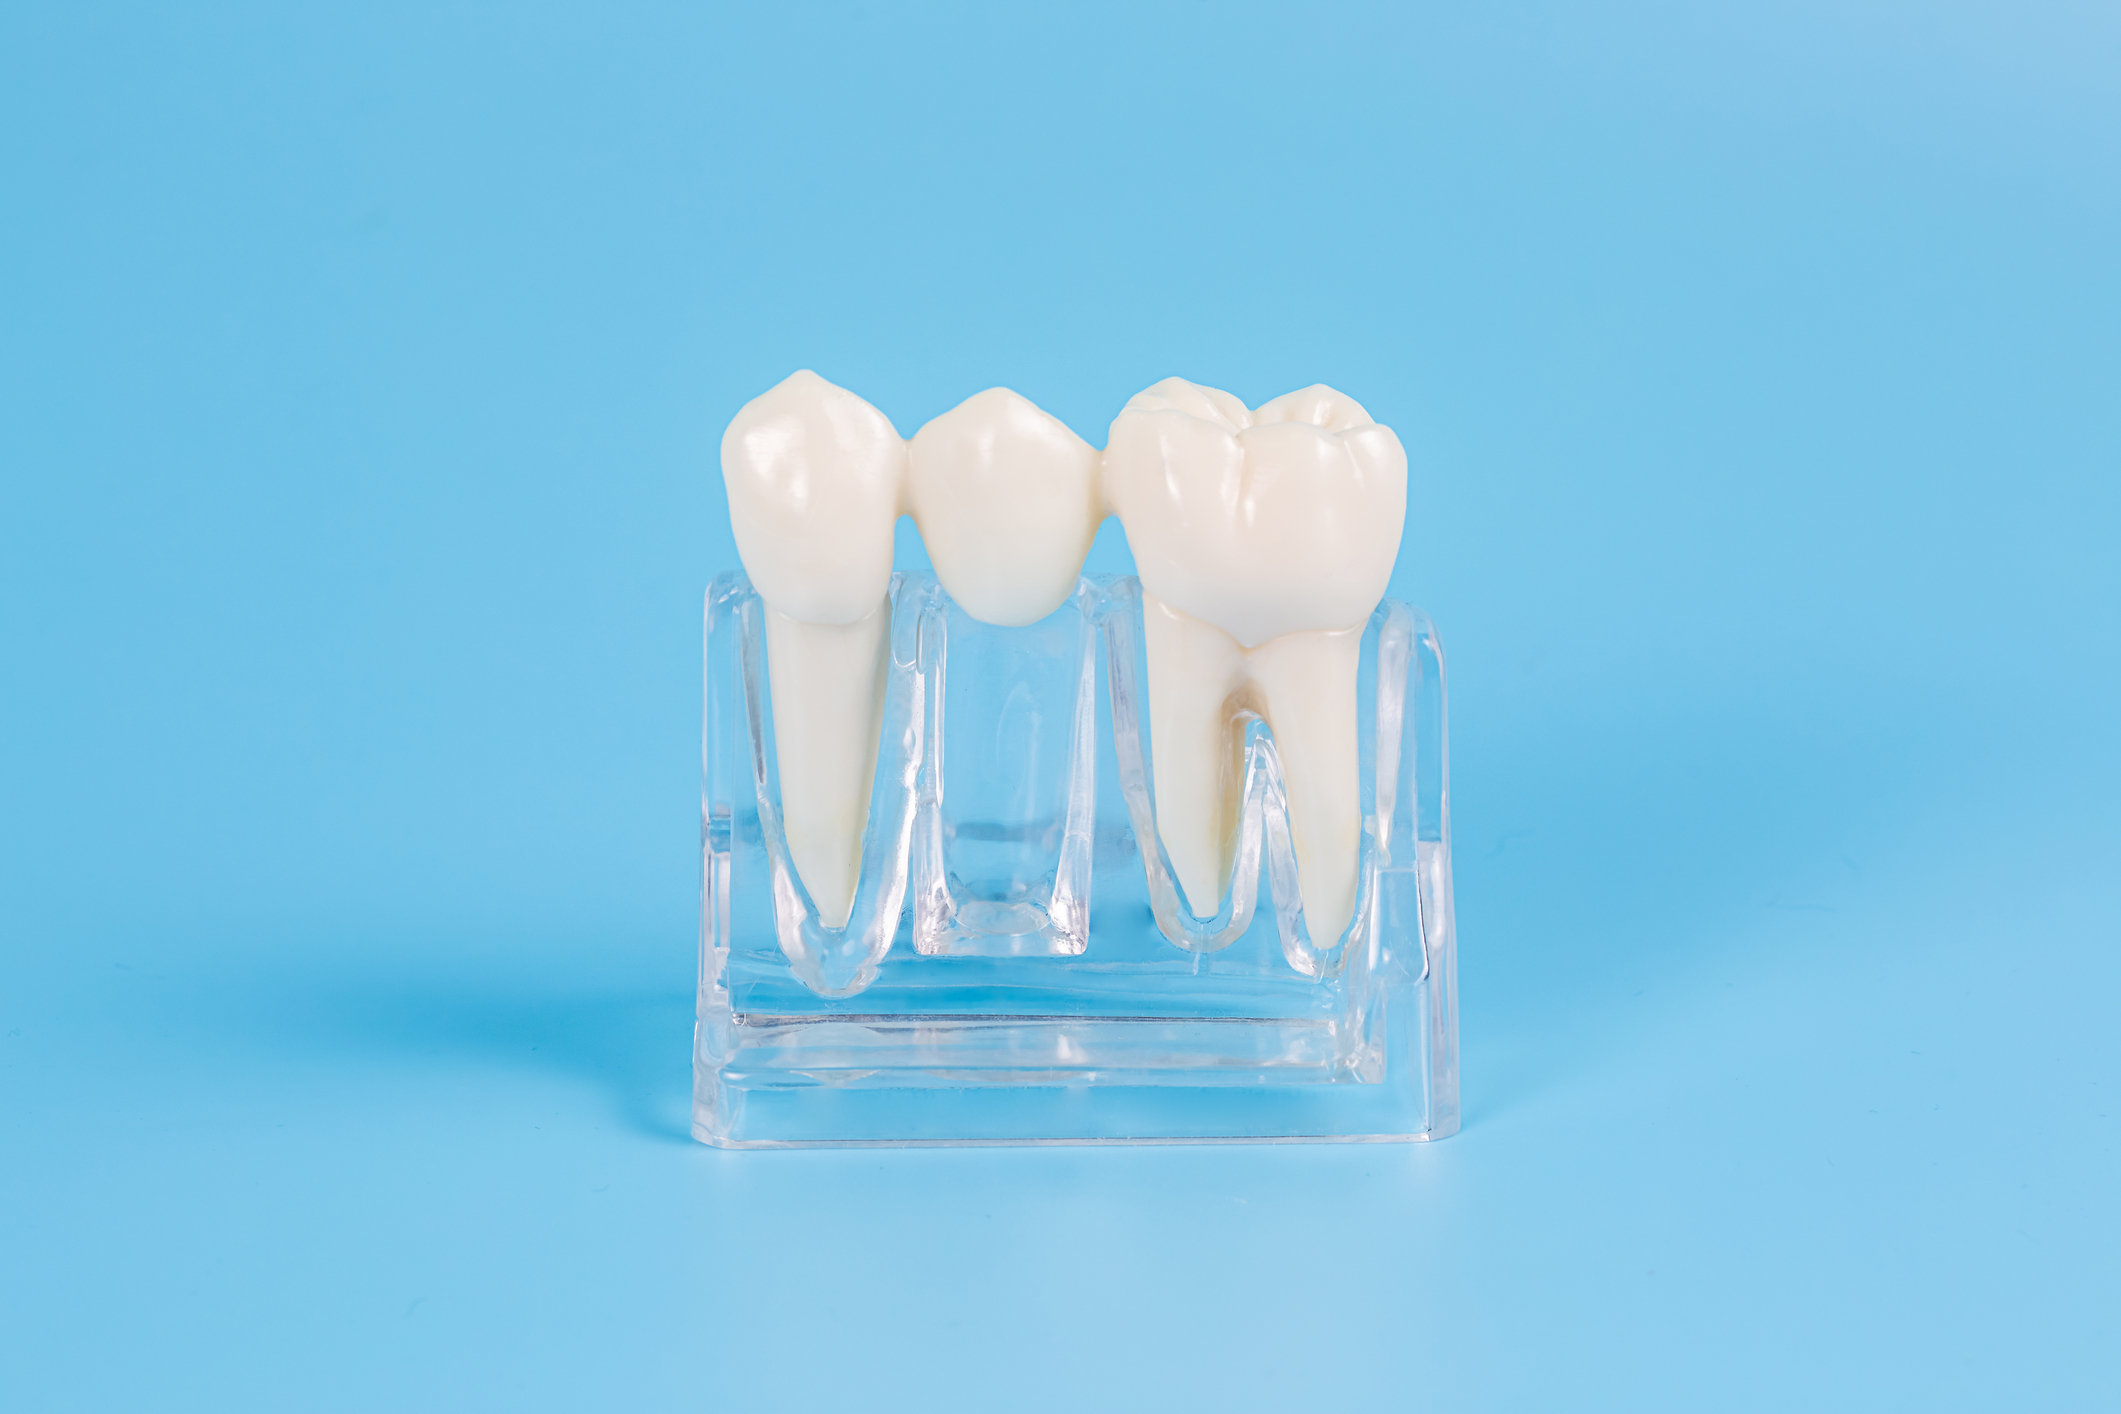 the nest treatment for a replacement tooth might be a bridge